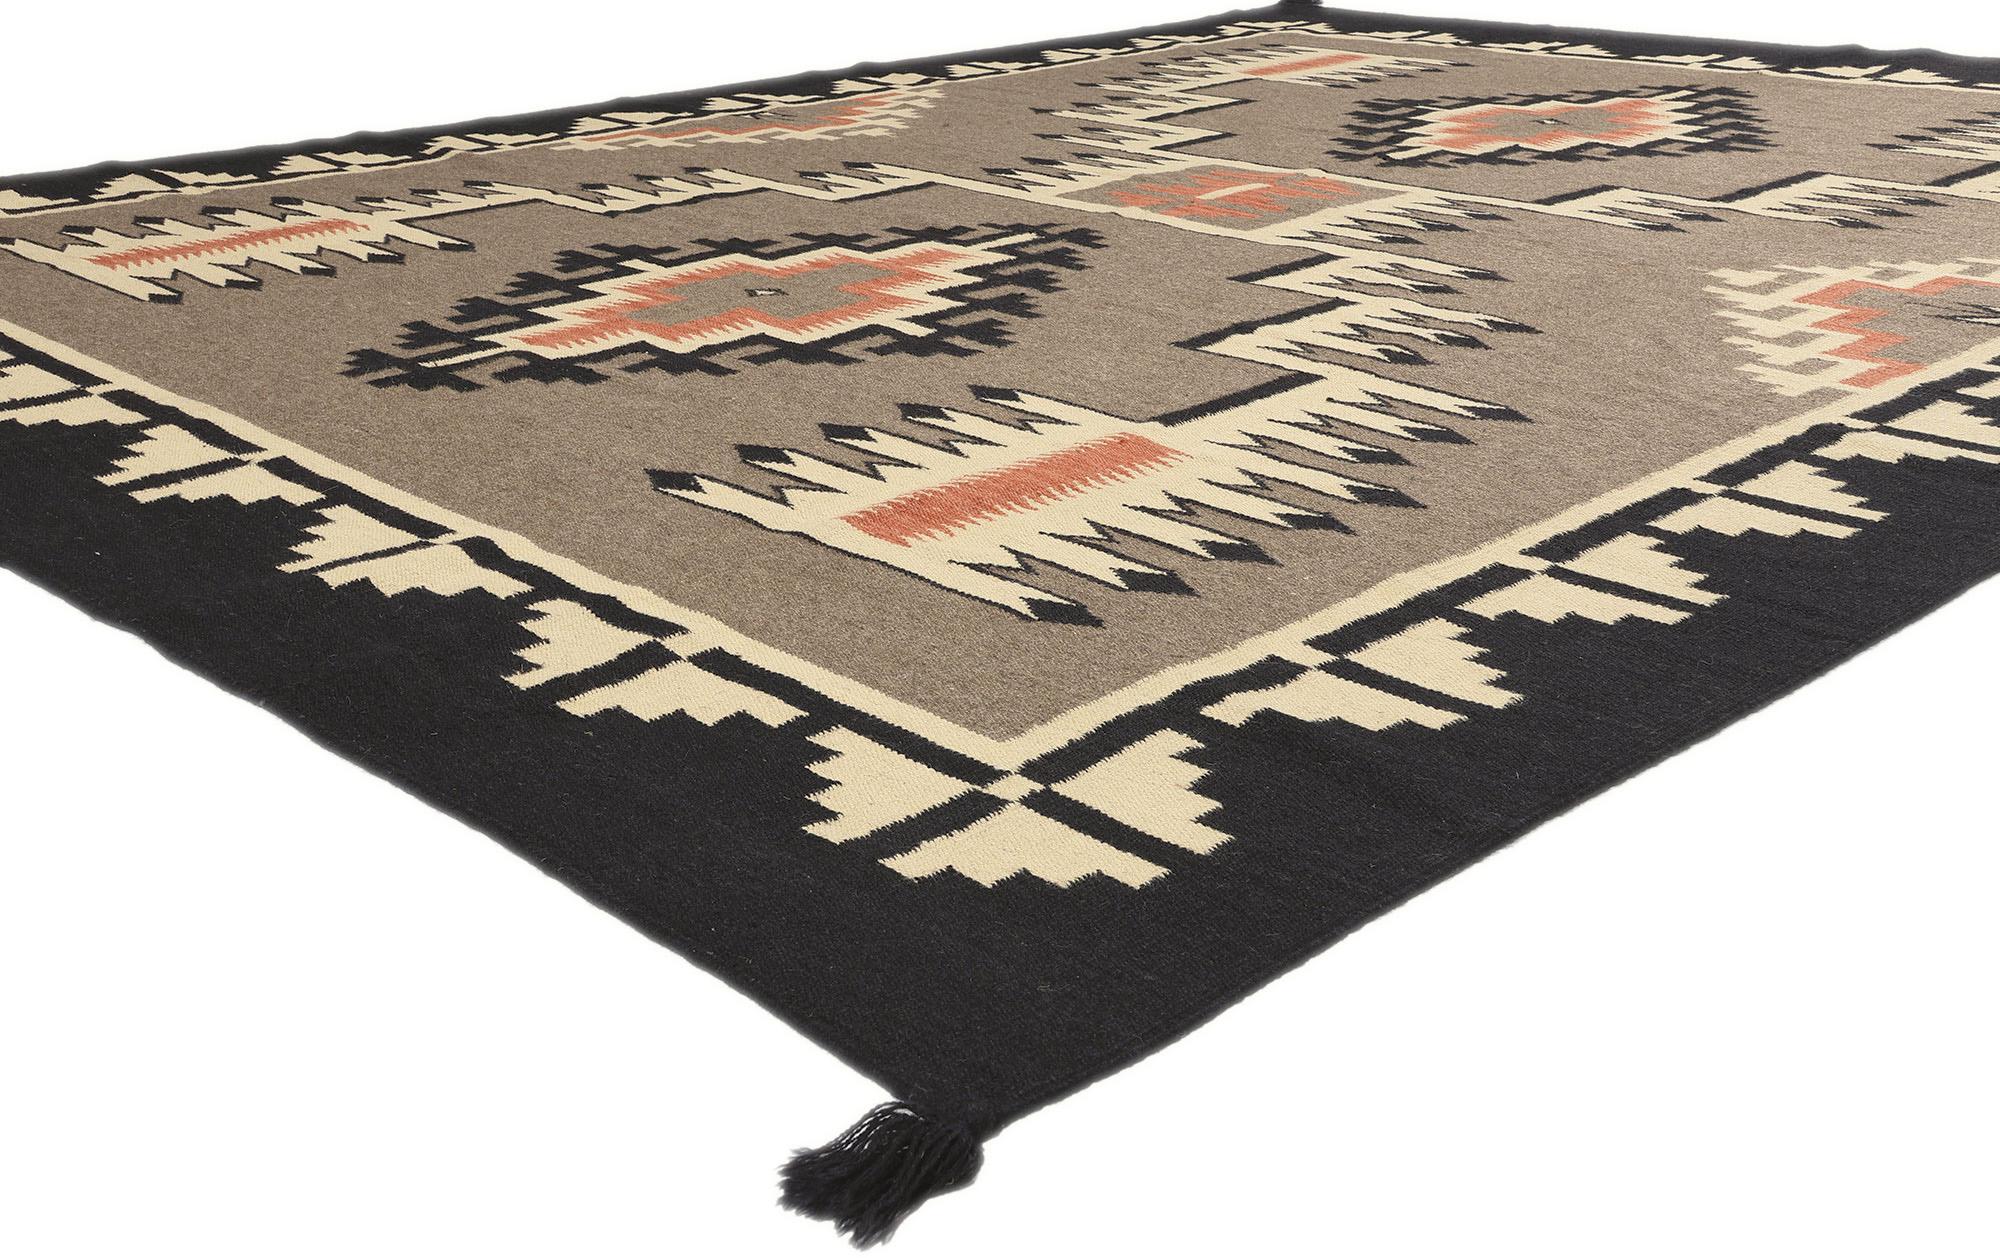 81021 Southwestern Navajo-Style Rug with Storm Pattern, 09'00 x 11'07. Enter the serene convergence of Native American design aesthetics, where the Shibui philosophy gracefully melds with the seamless fusion of Southwestern and Desert Modern styles